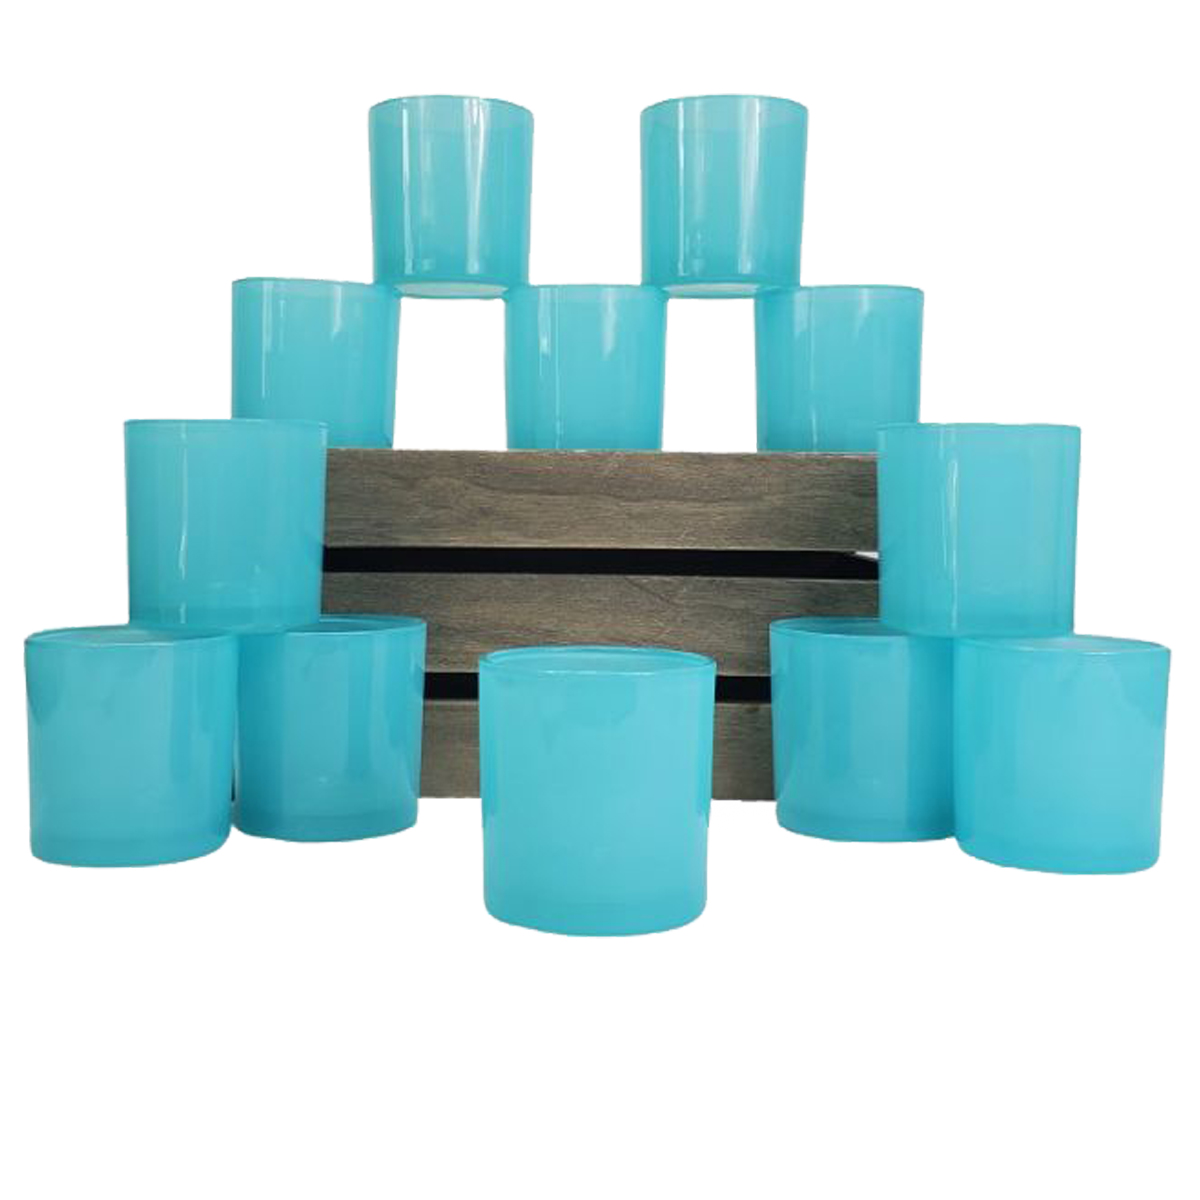 Monticiano Turquoise candle jars